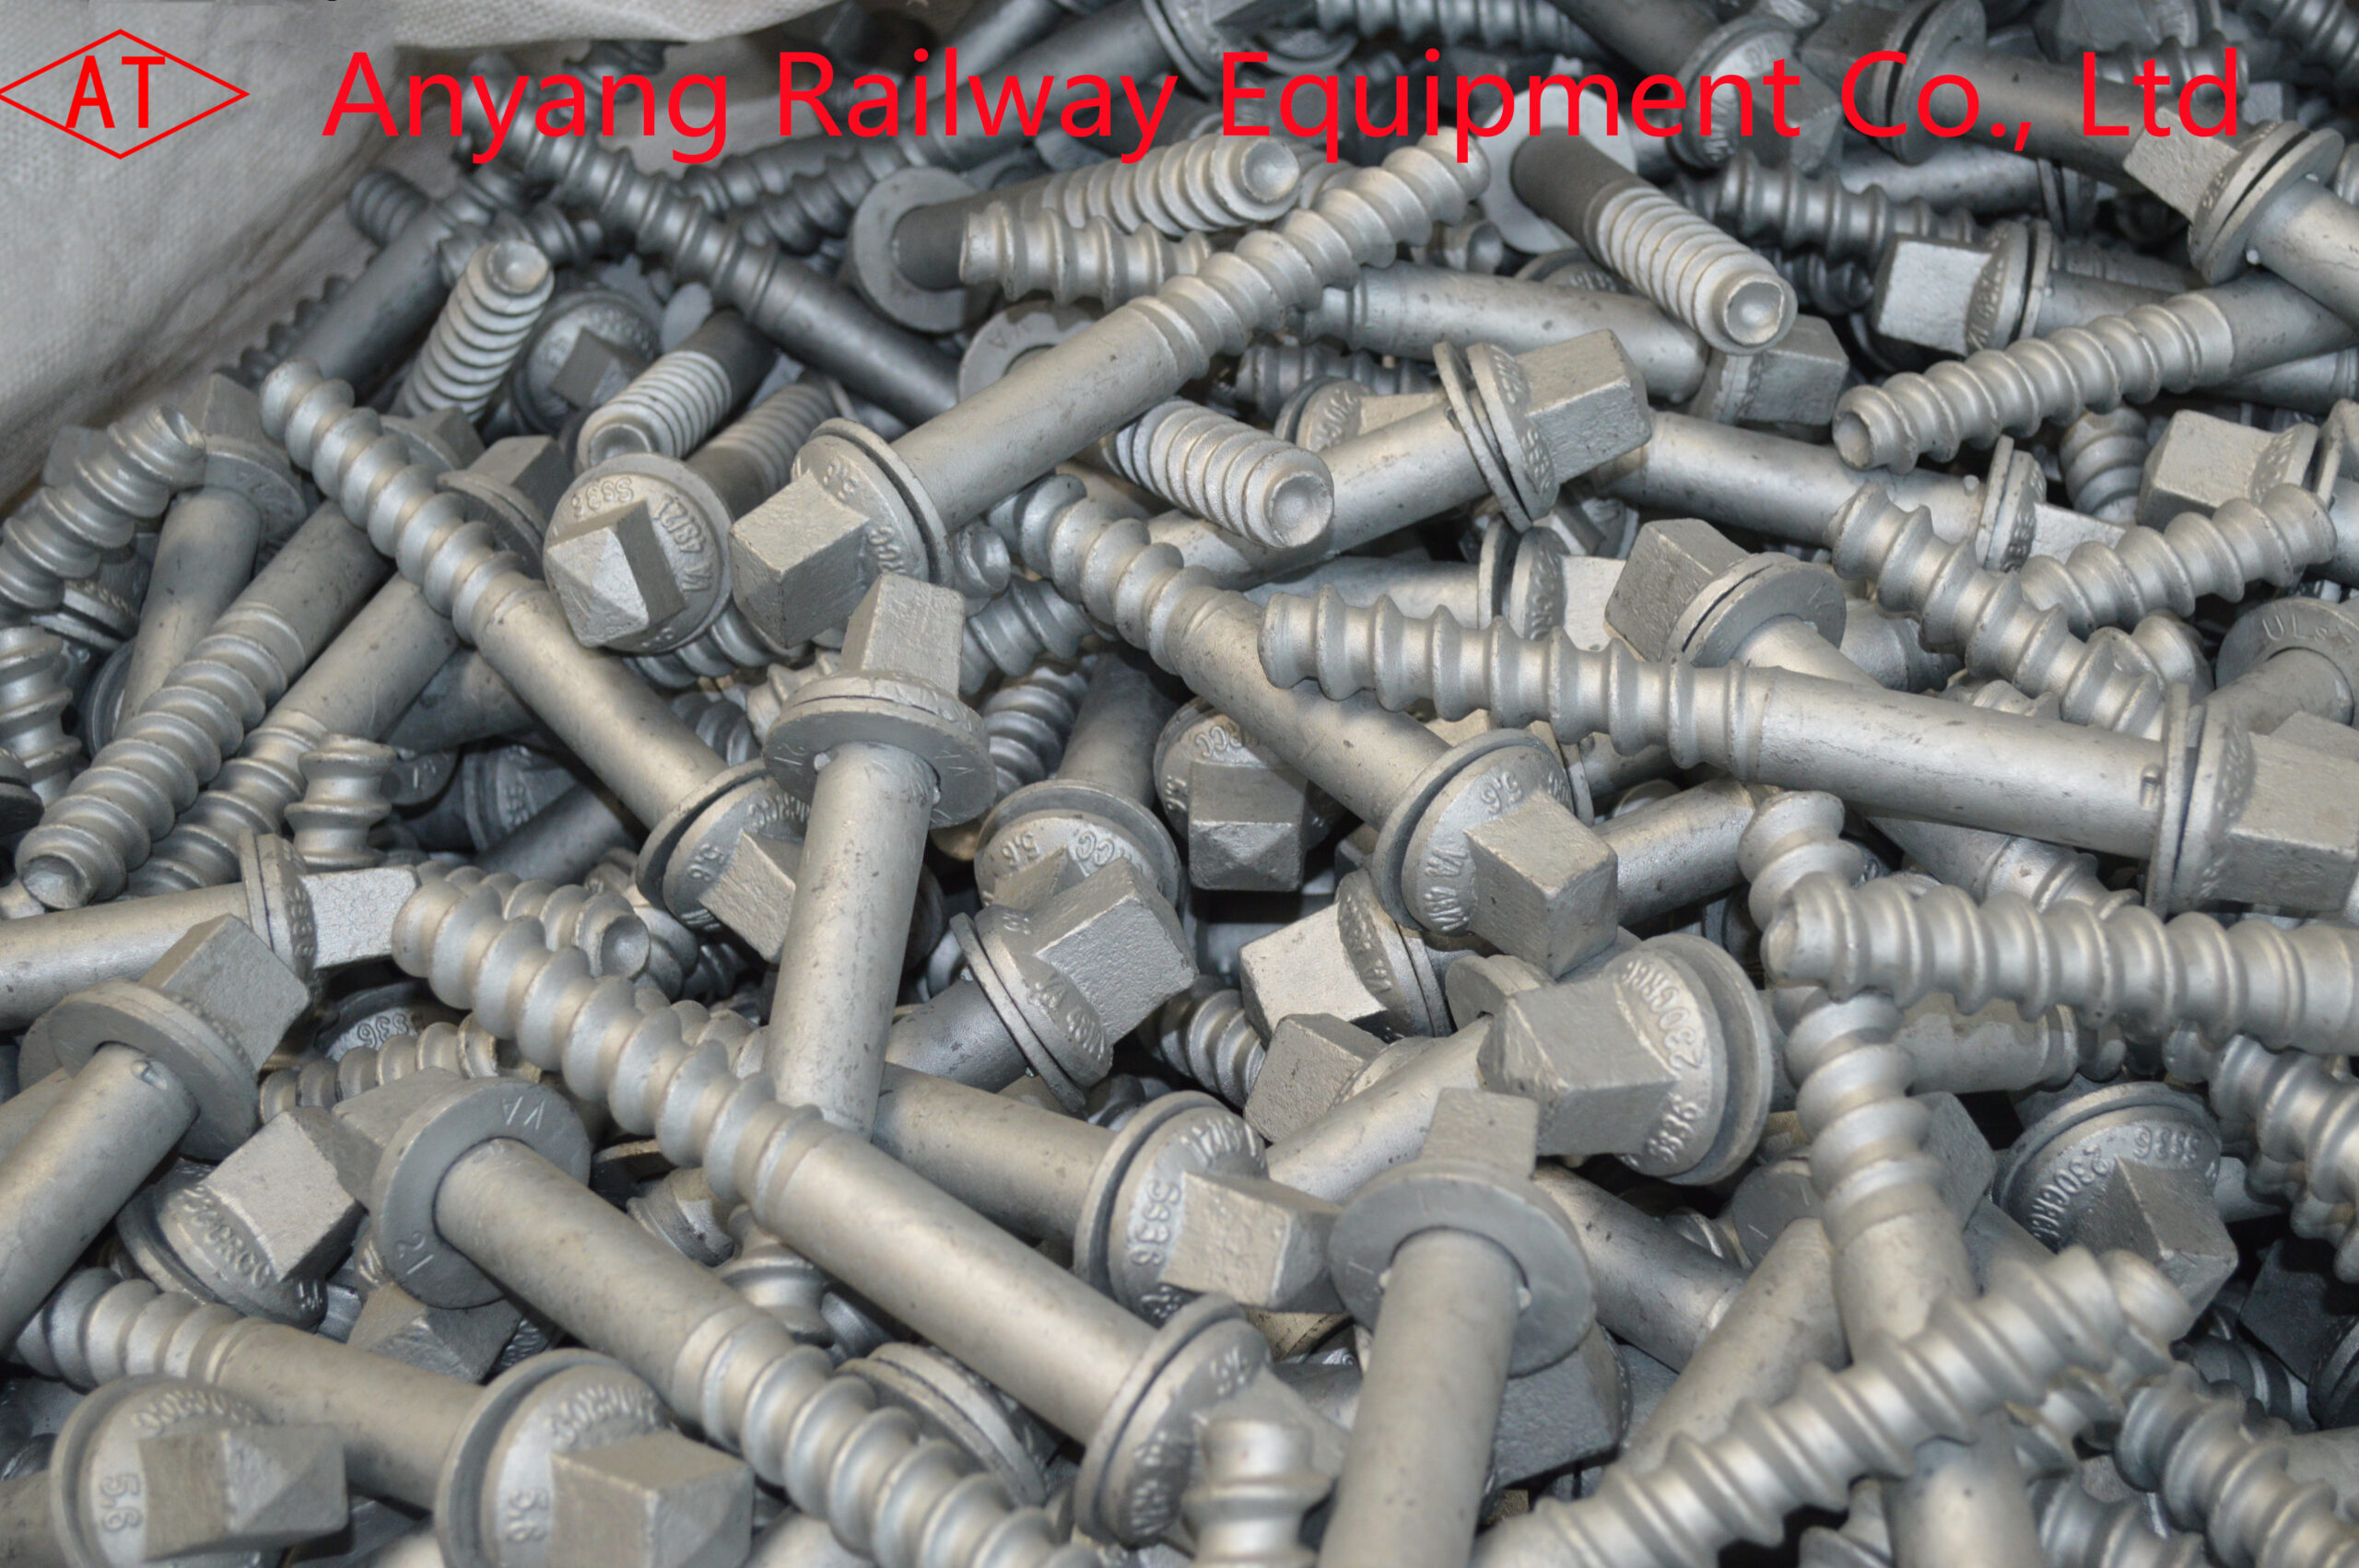 Screw Spikes, Threaded Spikes, Rail Spikes for Railway Fastening System